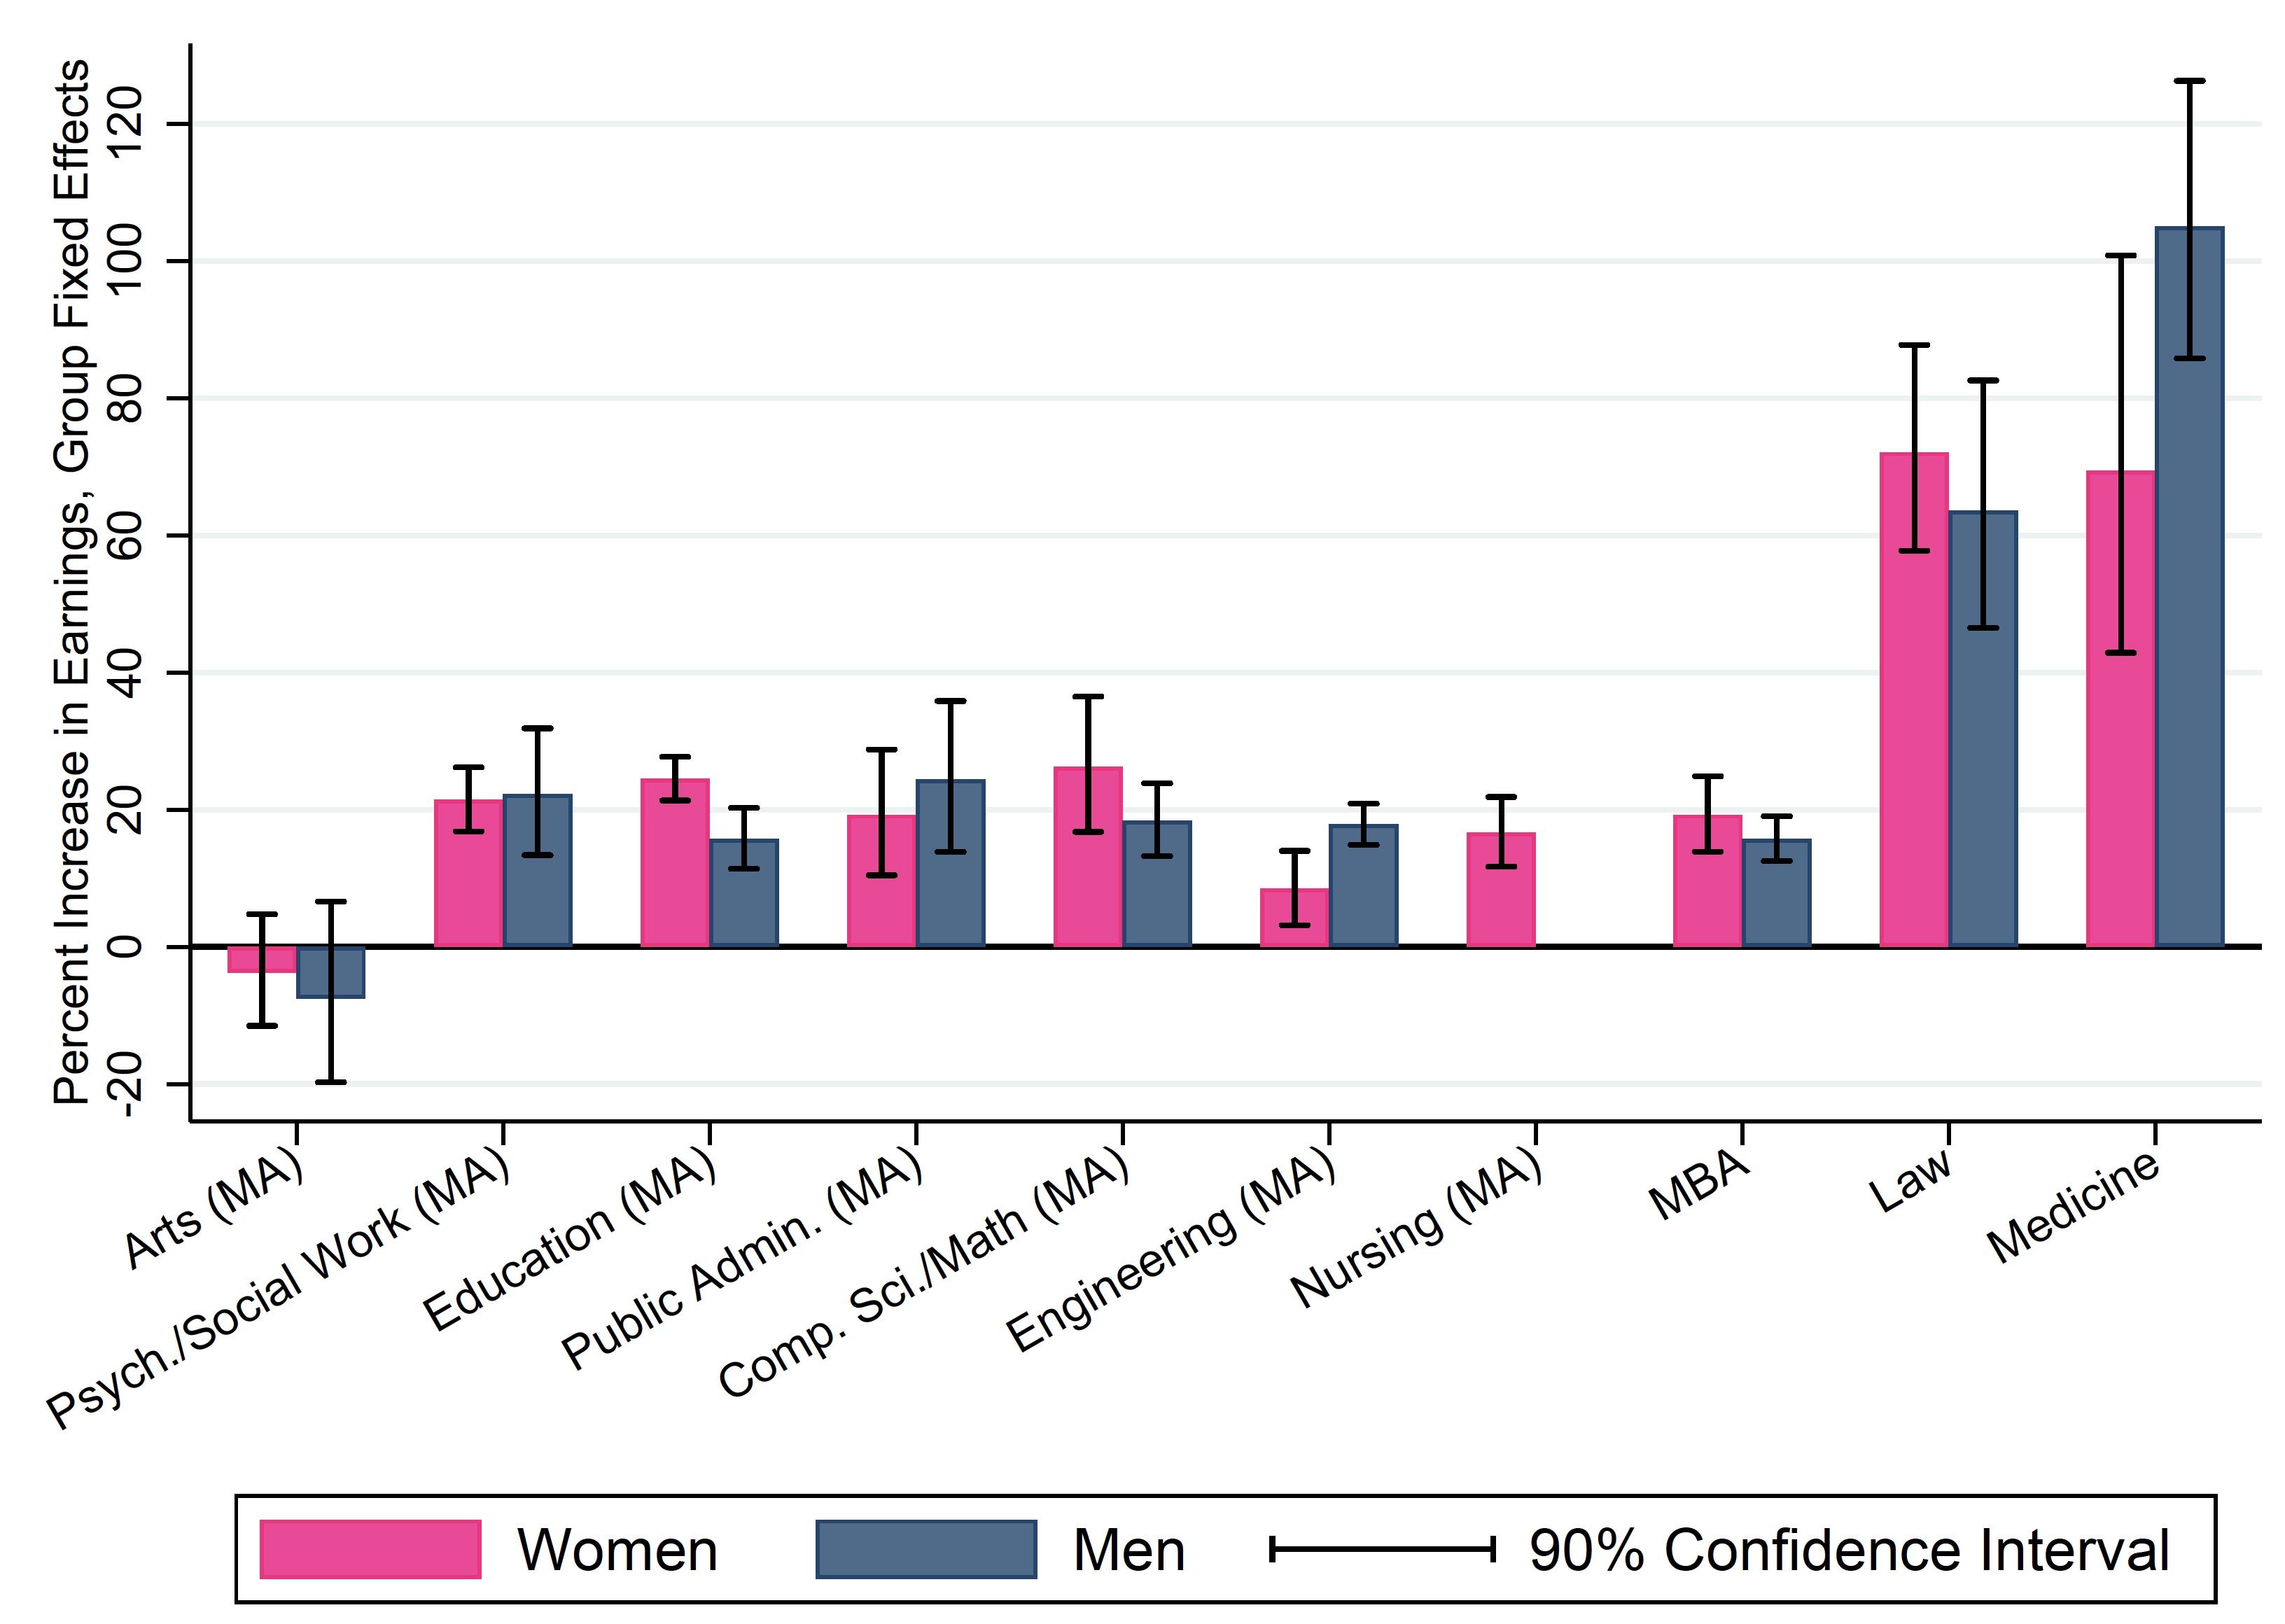 Figure 3 Percentage effect of graduate degrees on earnings by gender, degree group fixed effects (Fecg)